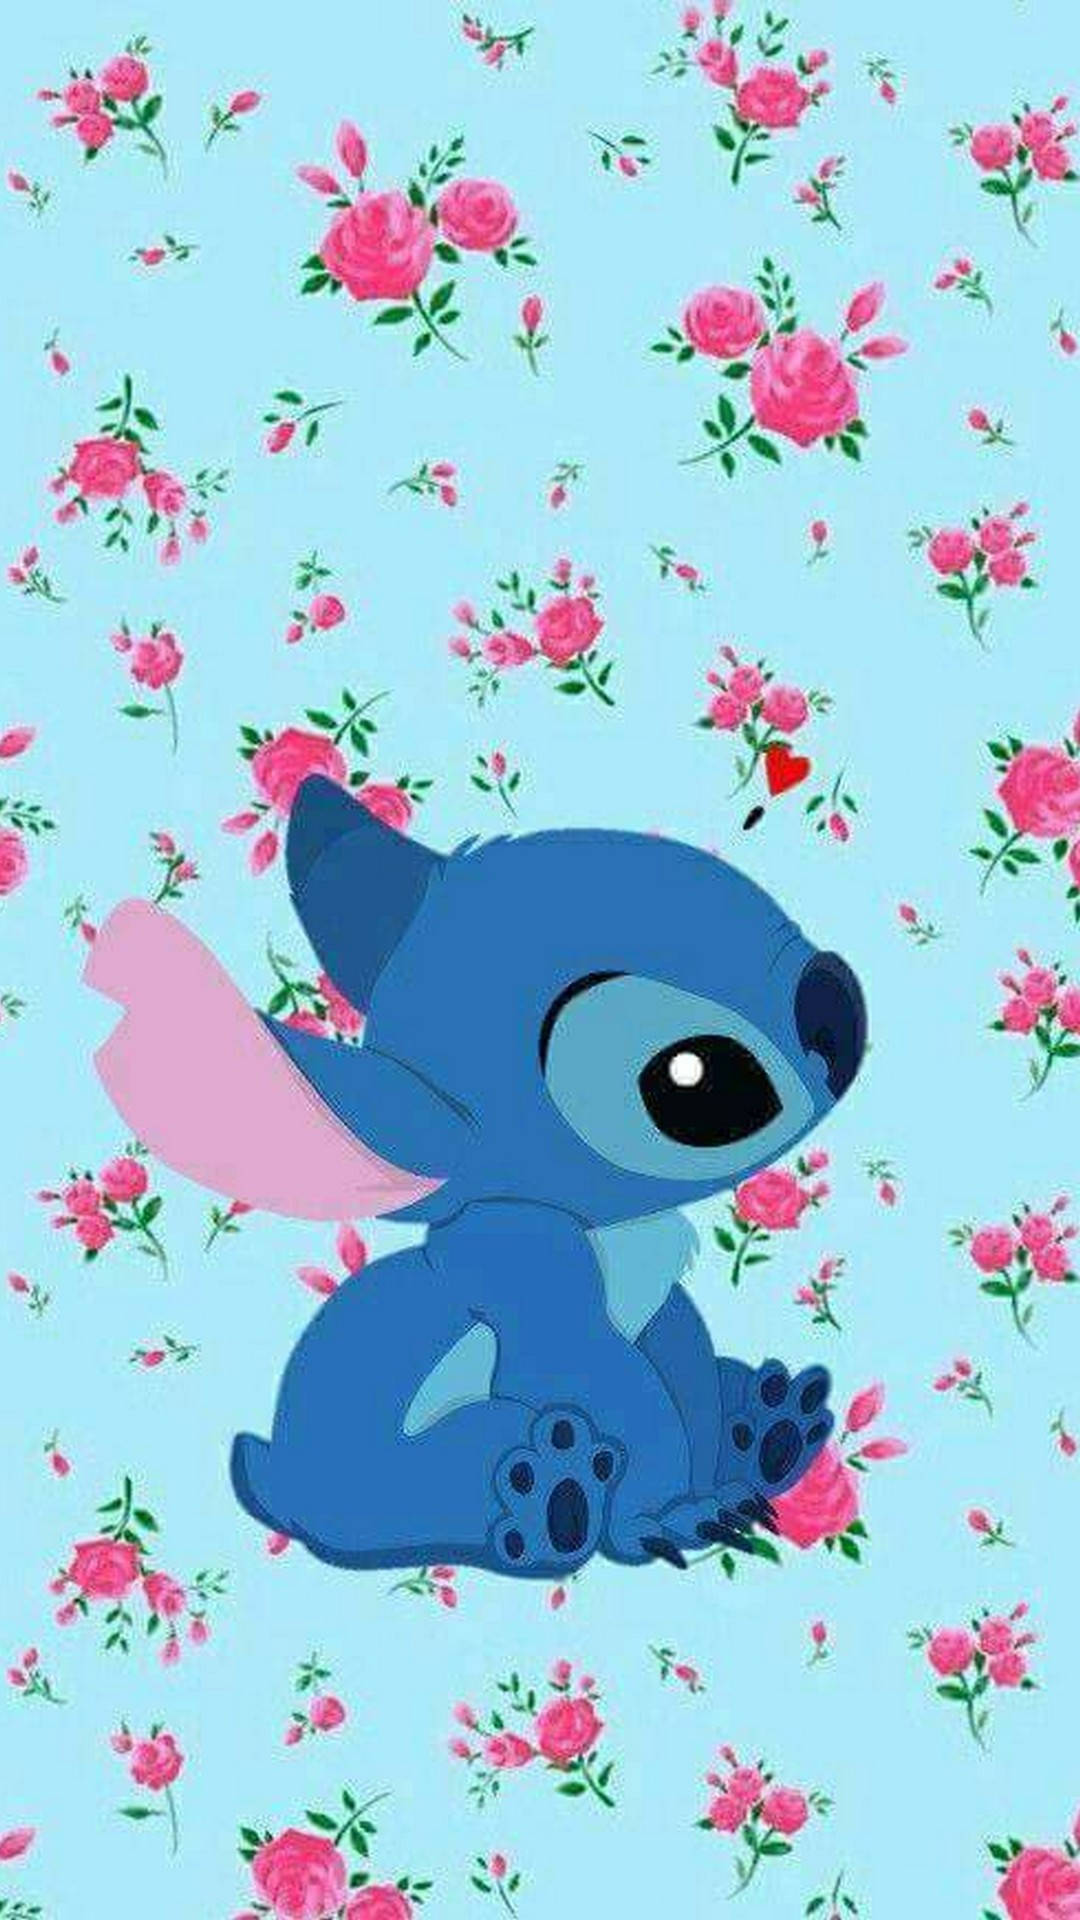 Cute Stitch And Pink Roses